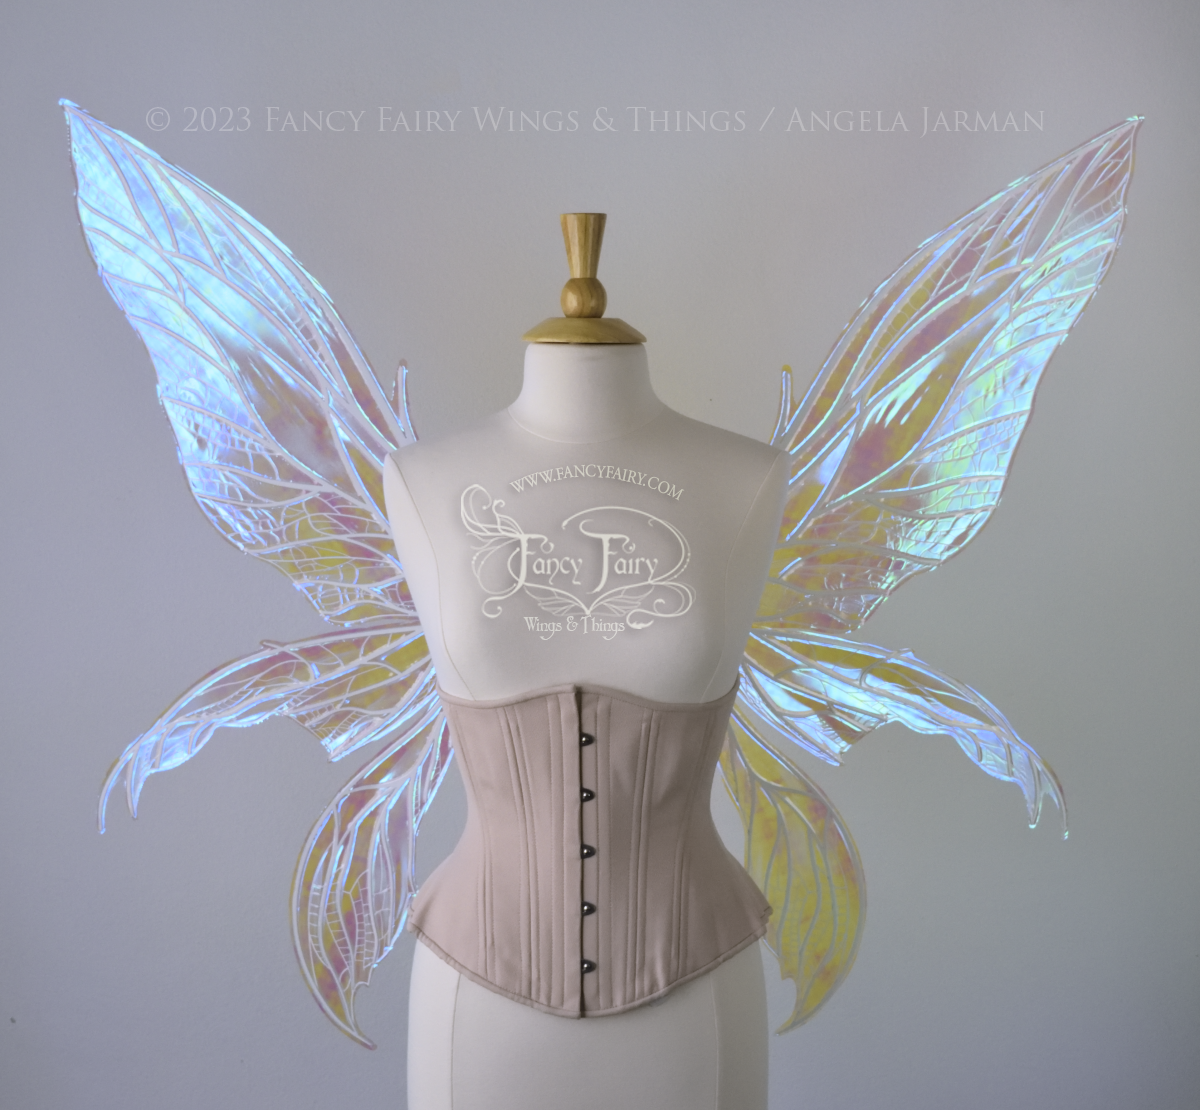 Front view of an ivory dress form wearing an underbust corset and large blue/teal/violet iridescent fairy wings. Upper panels are elongated with pointed tips, 2 lower panels curve downward, detailed white veins 